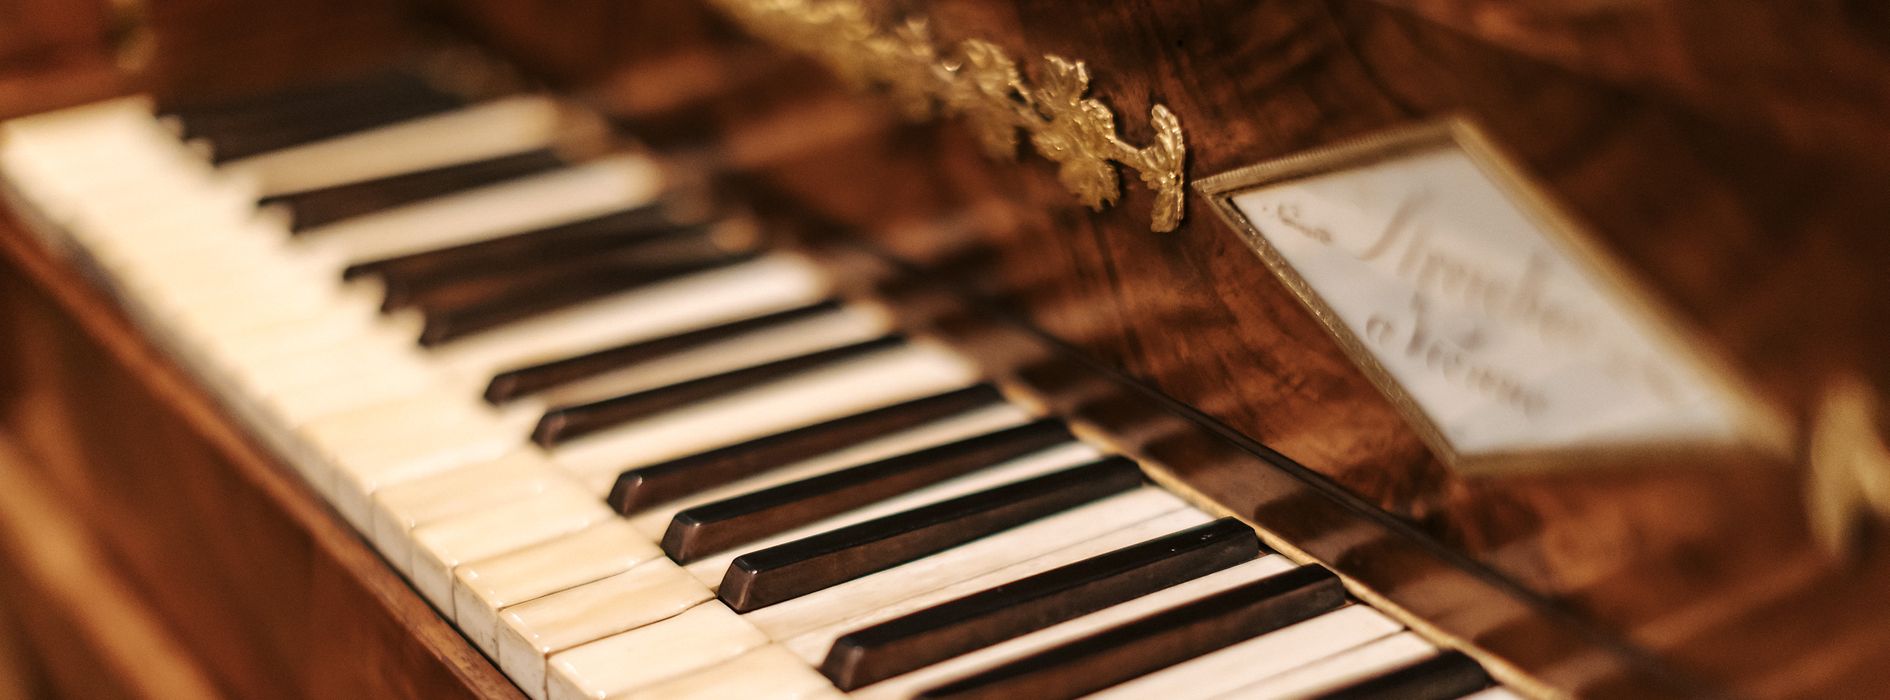 Collection of Historic Musical Instruments, piano, keyboard